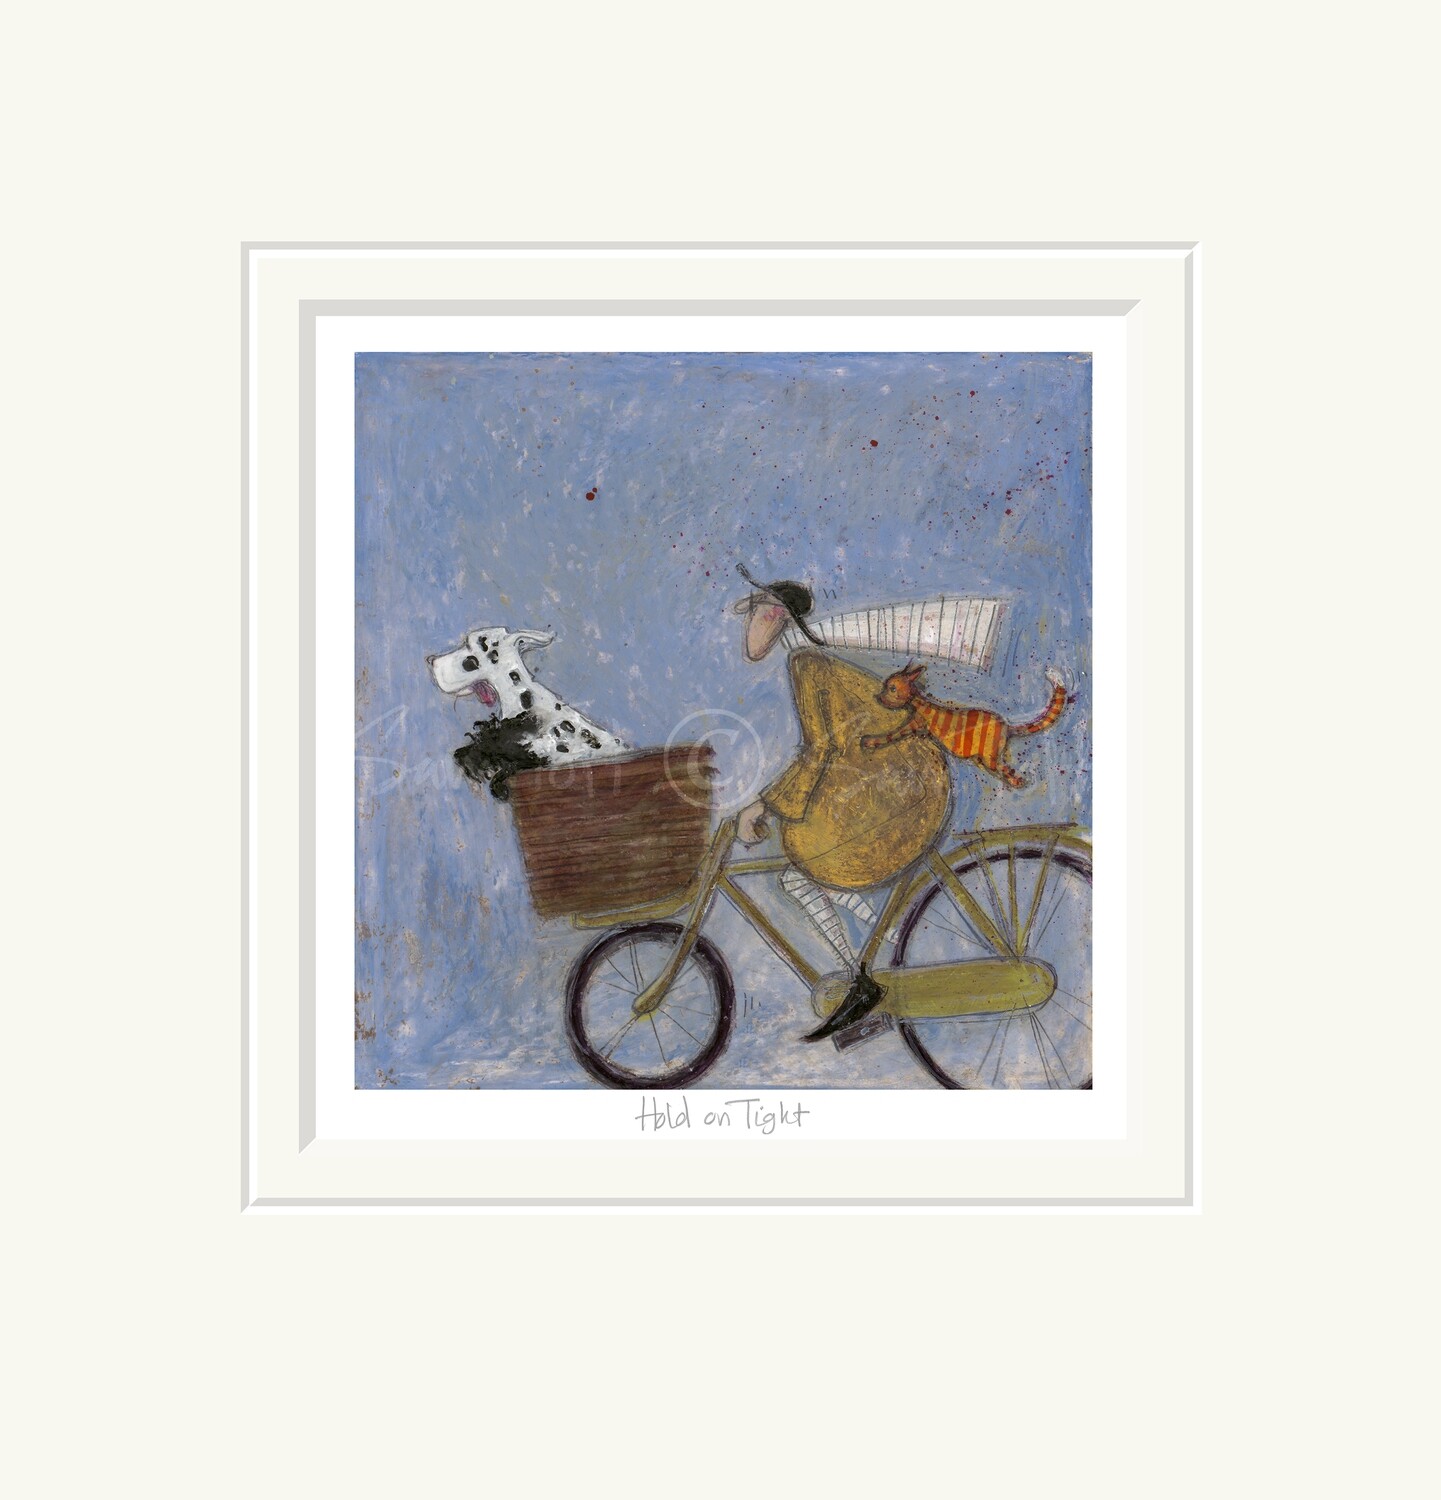 Hold On Tight by Sam Toft